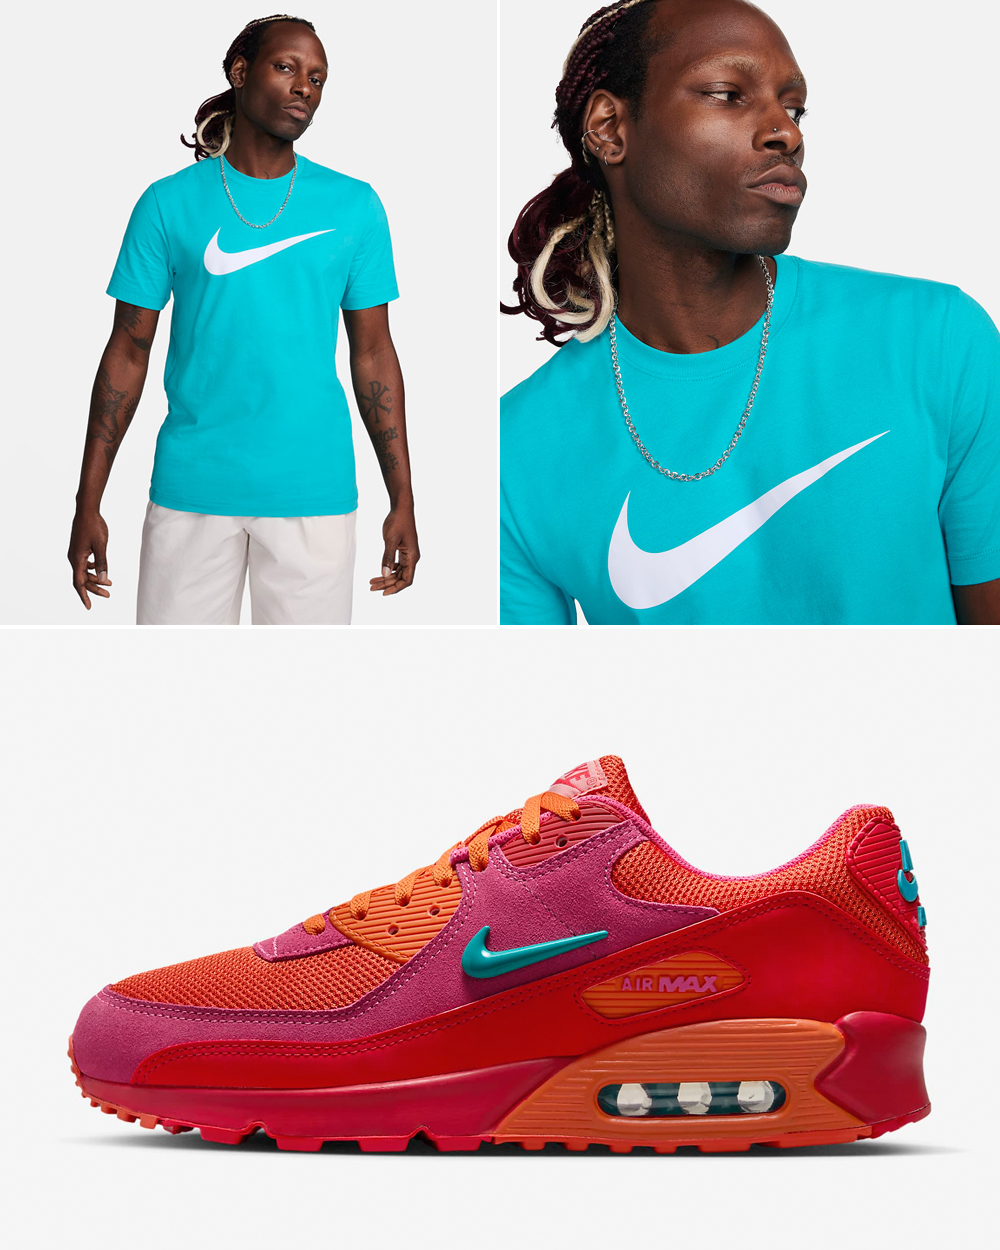 Nike-Air-Max-90-Alchemy-Pink-Cosmic-Clay-Dusty-Cactus-Shirt-Outfit